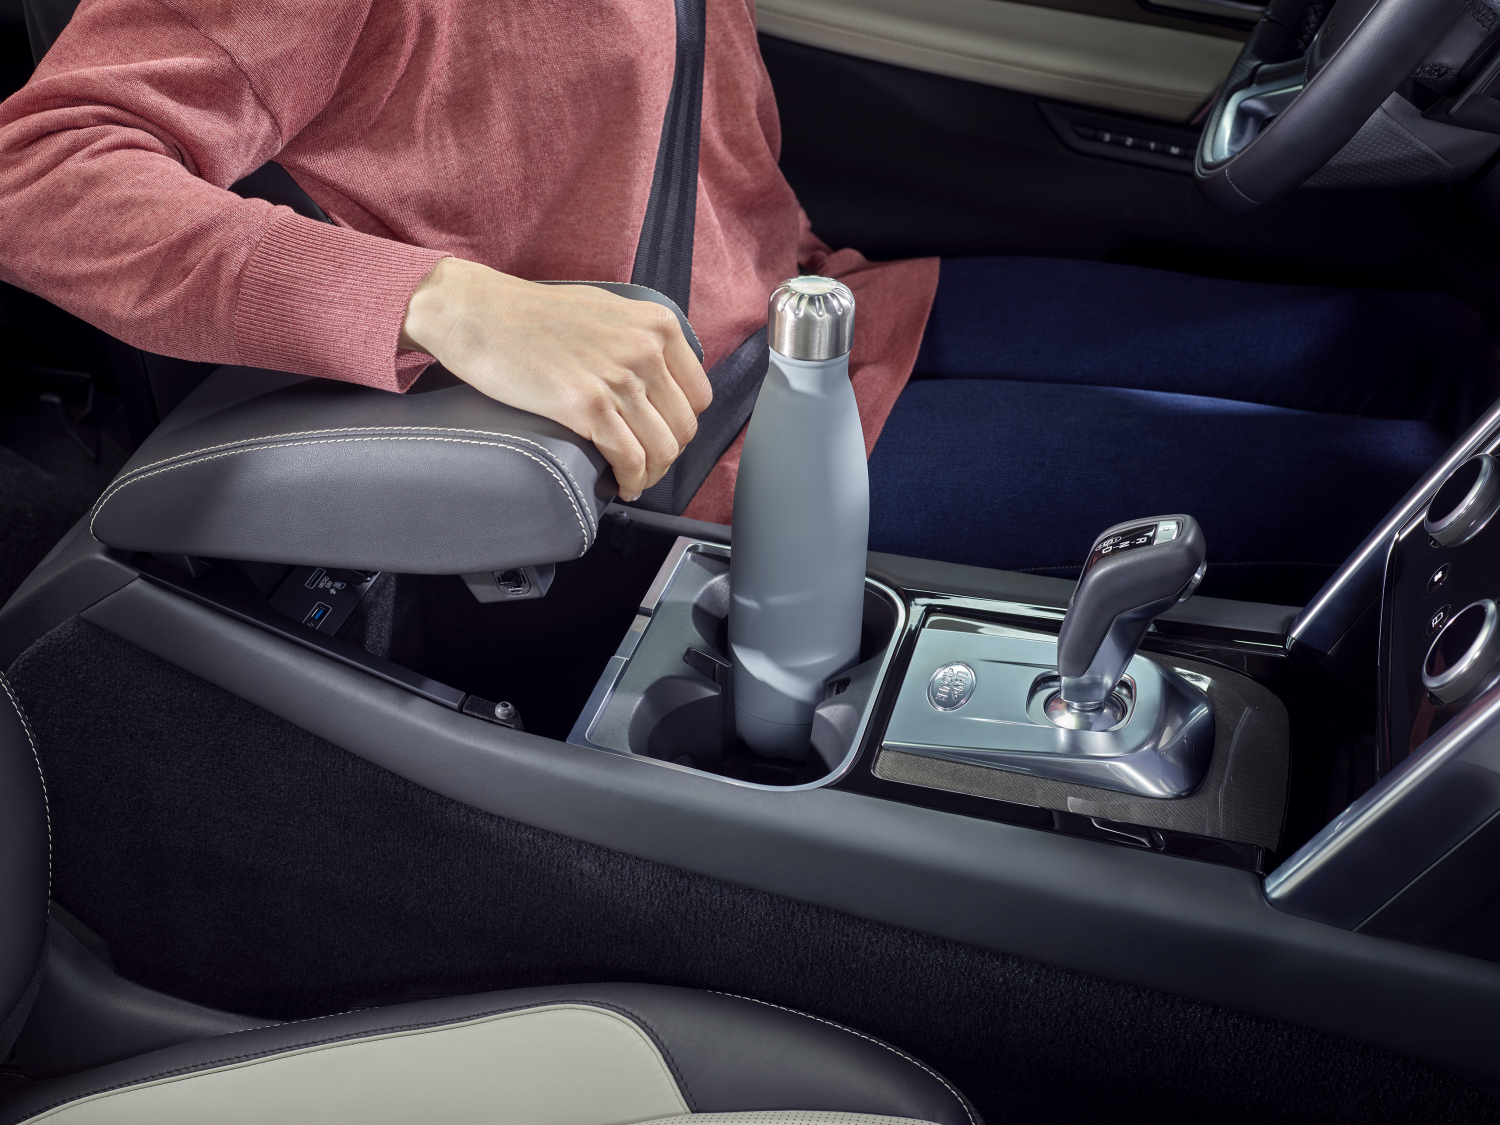 INTERIOR – NEW DISCOVERY SPORT